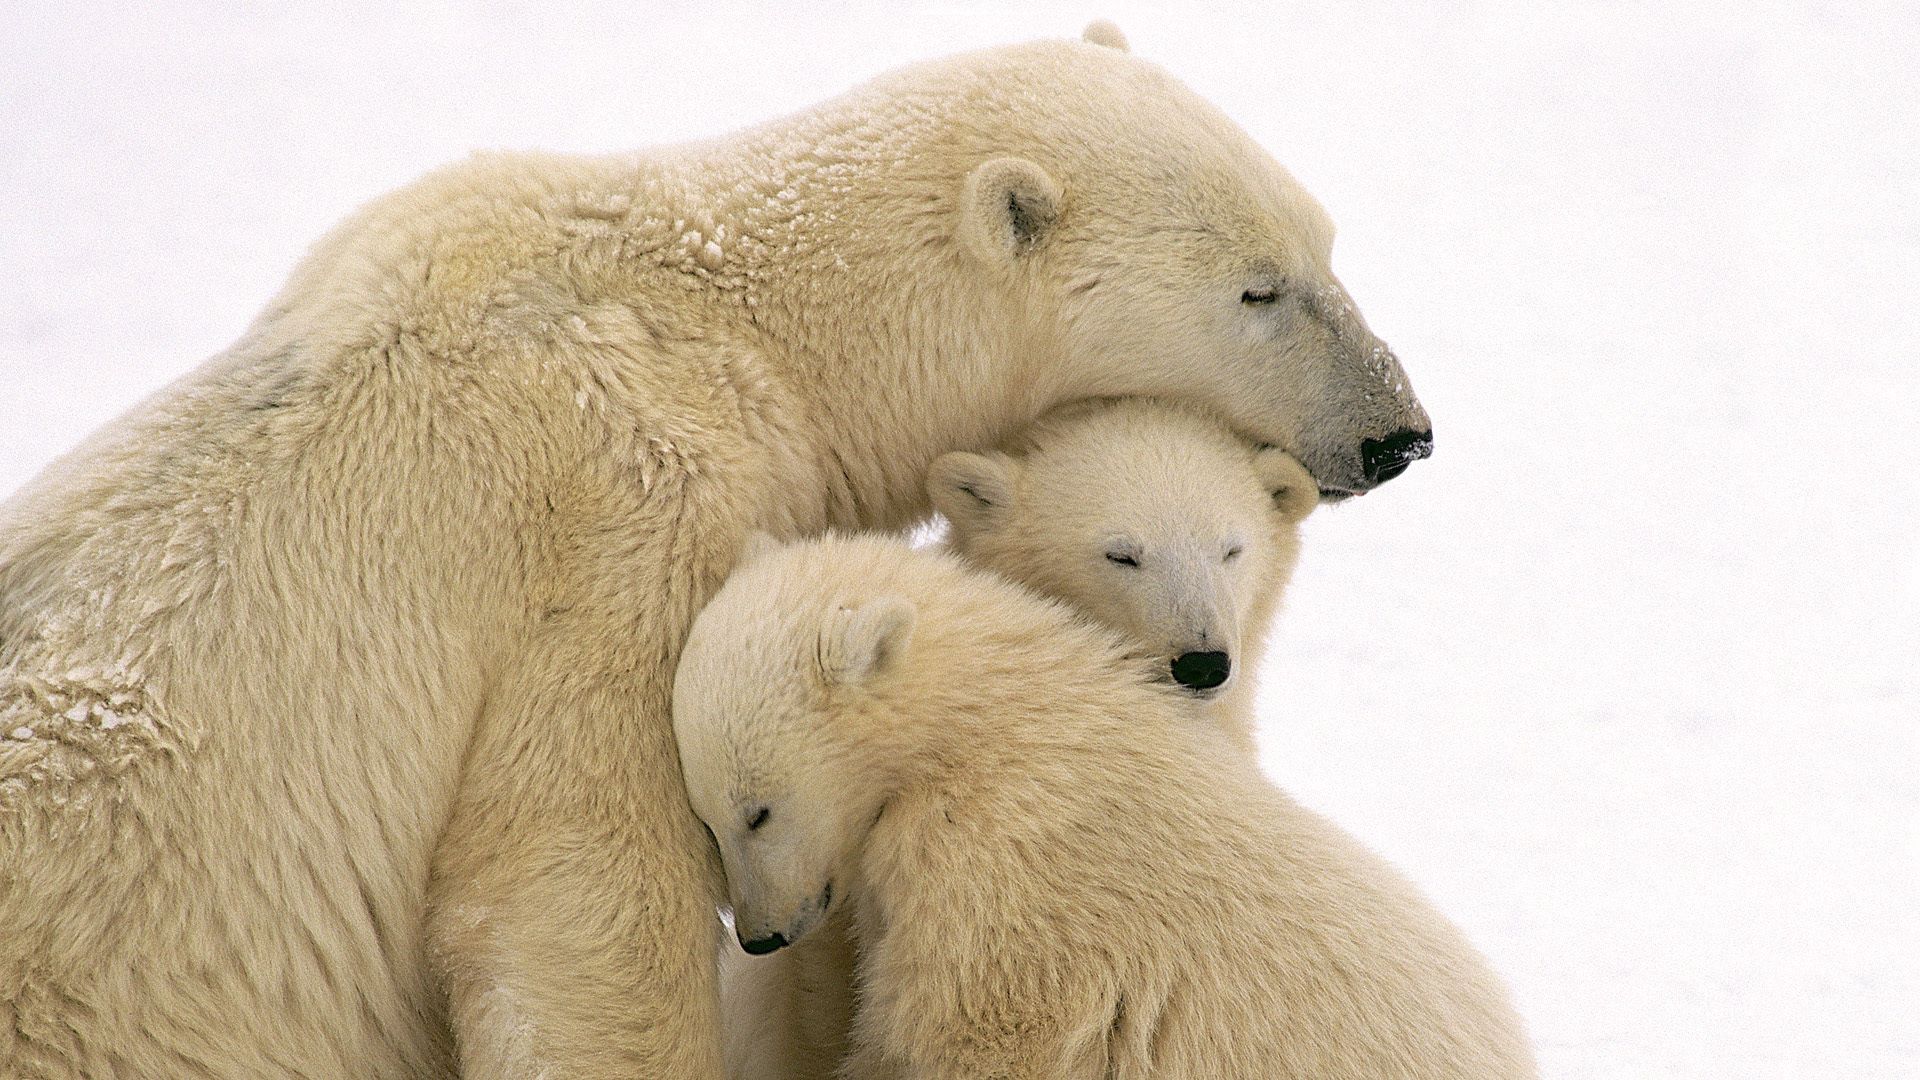 polar bears, animals, young, family, care, cubs, white bears